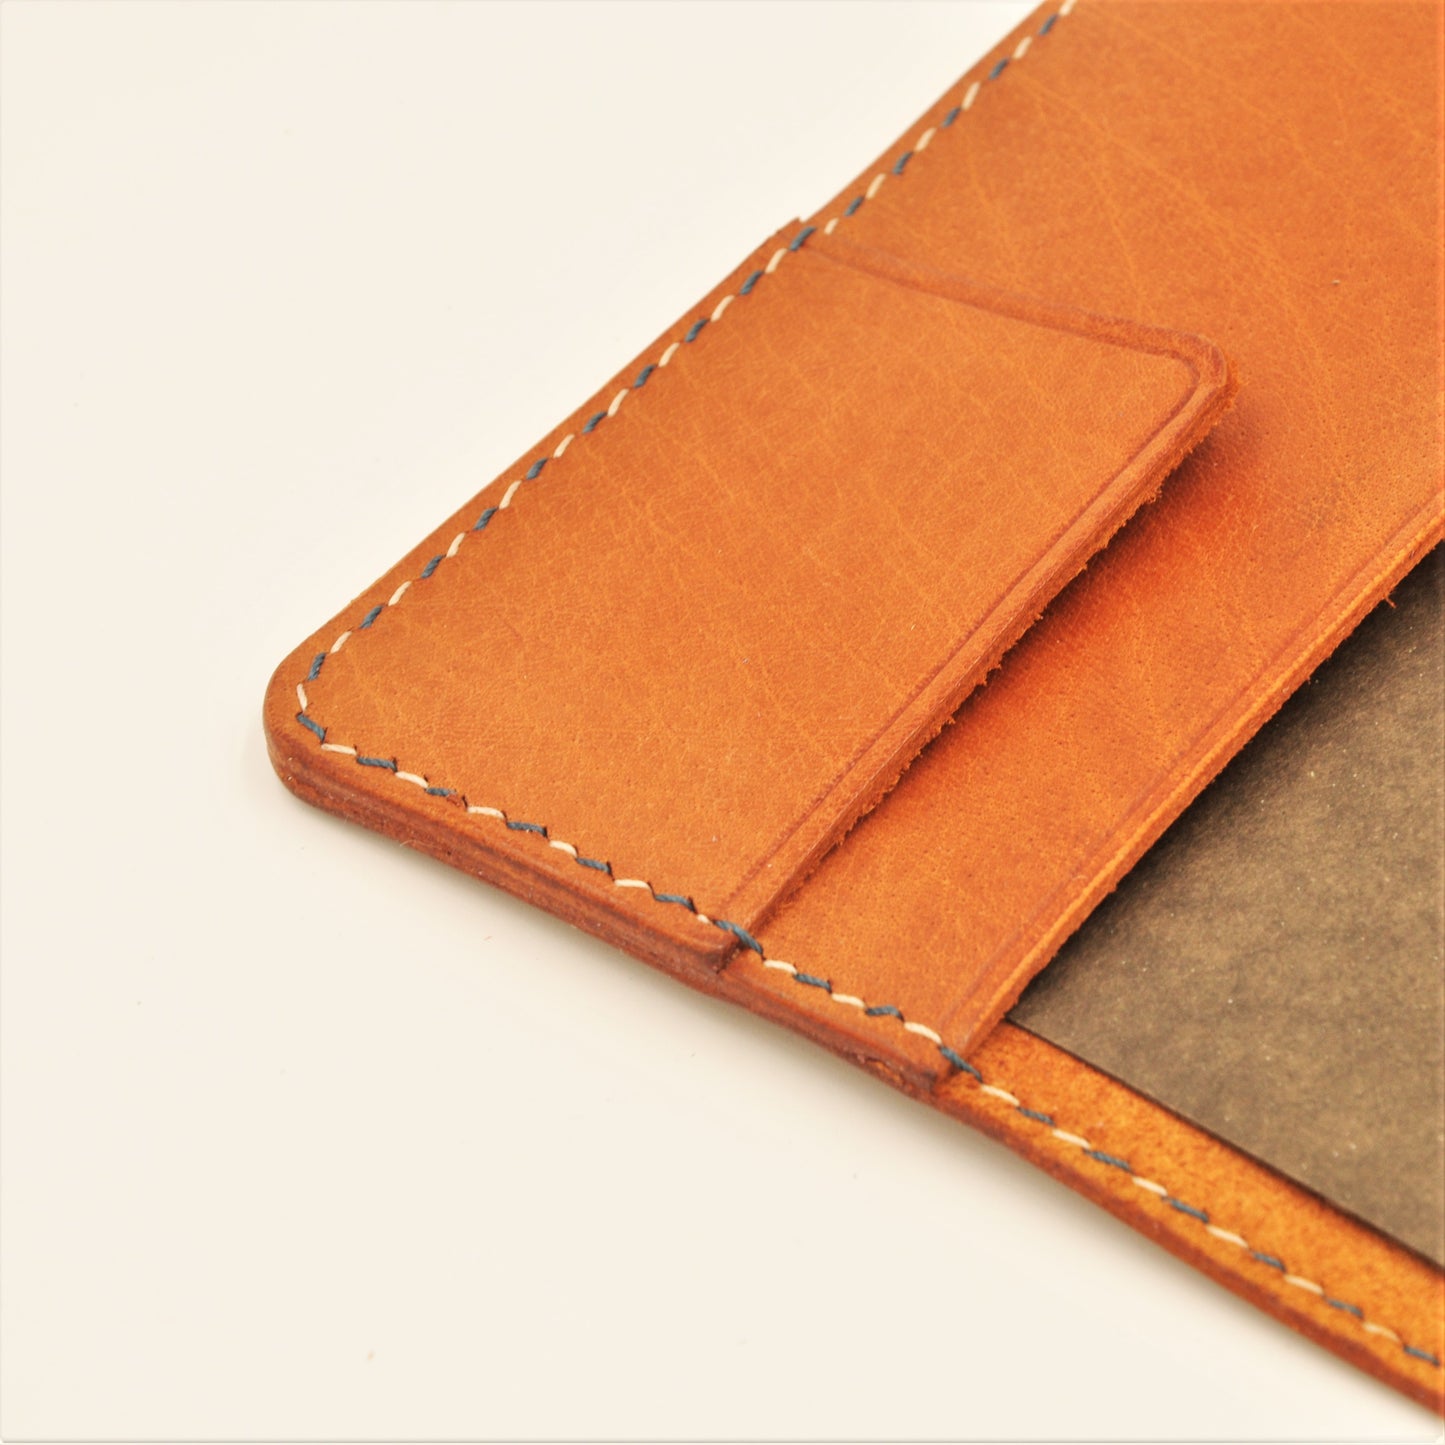 JAKOB A6-P Leather Notebook Sleeve with Lock